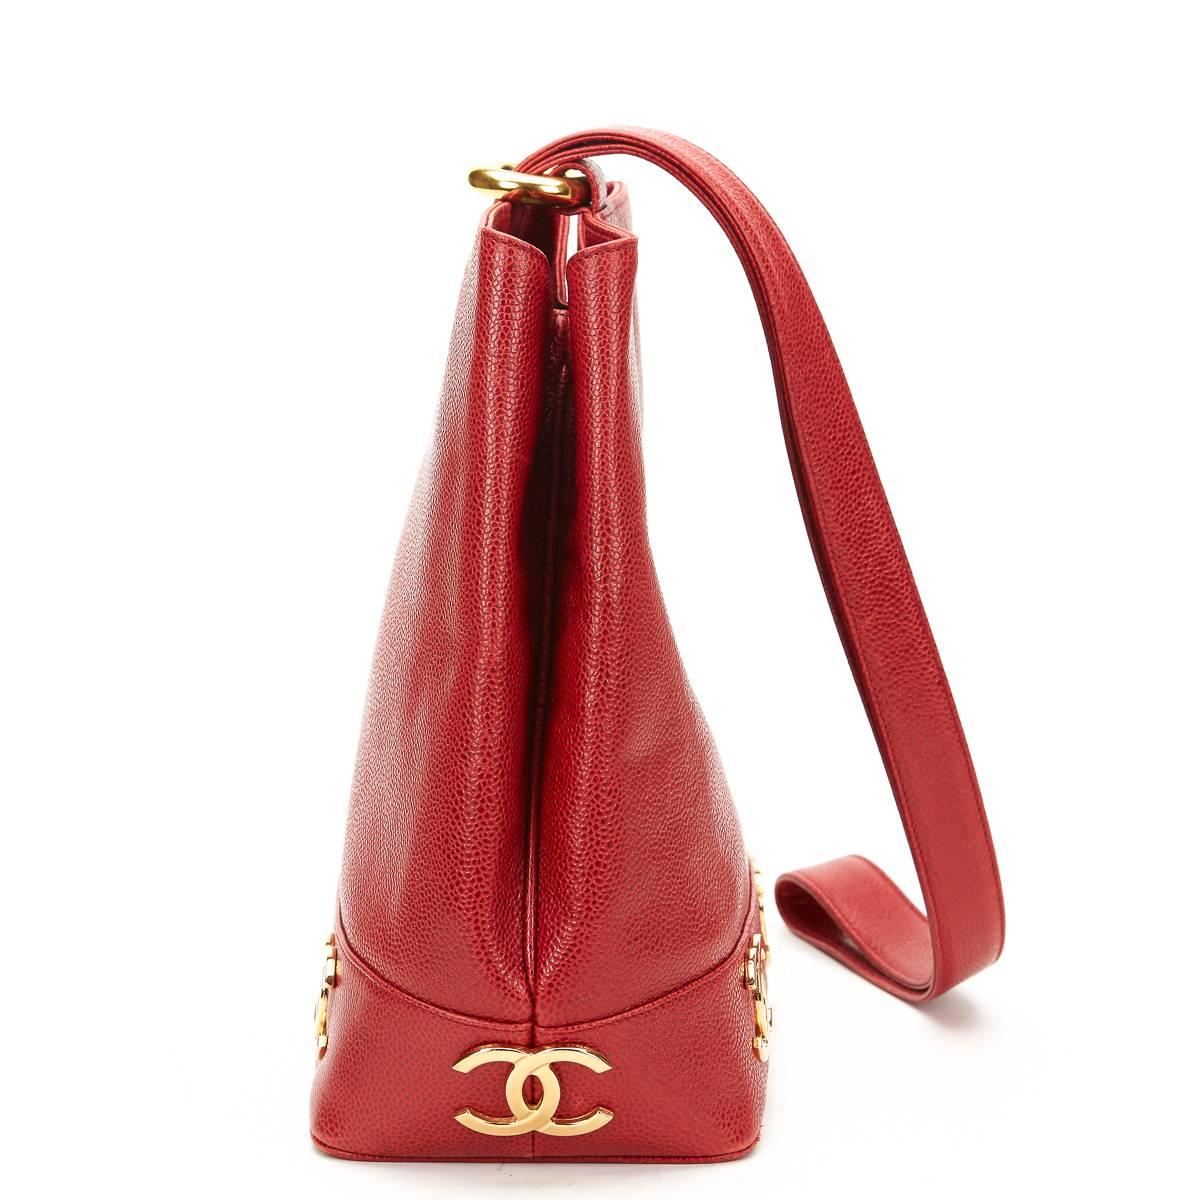 CHANEL
Red Caviar Leather Vintage Bucket Bag

This CHANEL Bucket Bag is in Excellent Pre-Owned Condition. Circa 1992. Primarily made from Caviar Leather complimented by Gold hardware. Our  reference is HB646 should you need to quote this.

